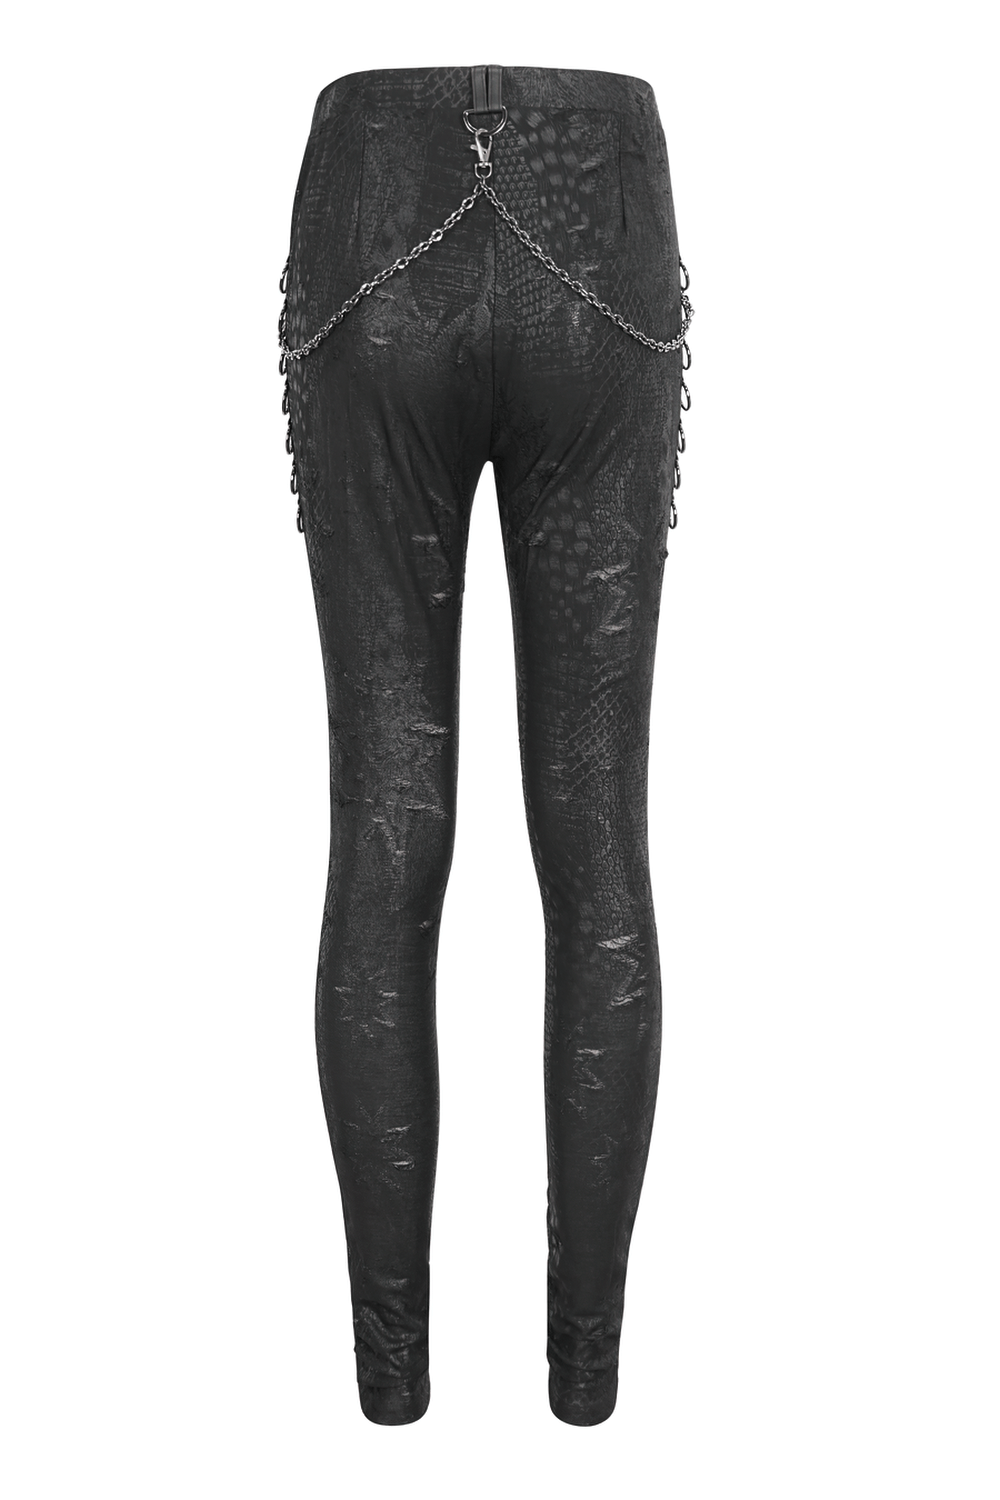 Chic Reptile Print Skinny Leggings with Chain for Women